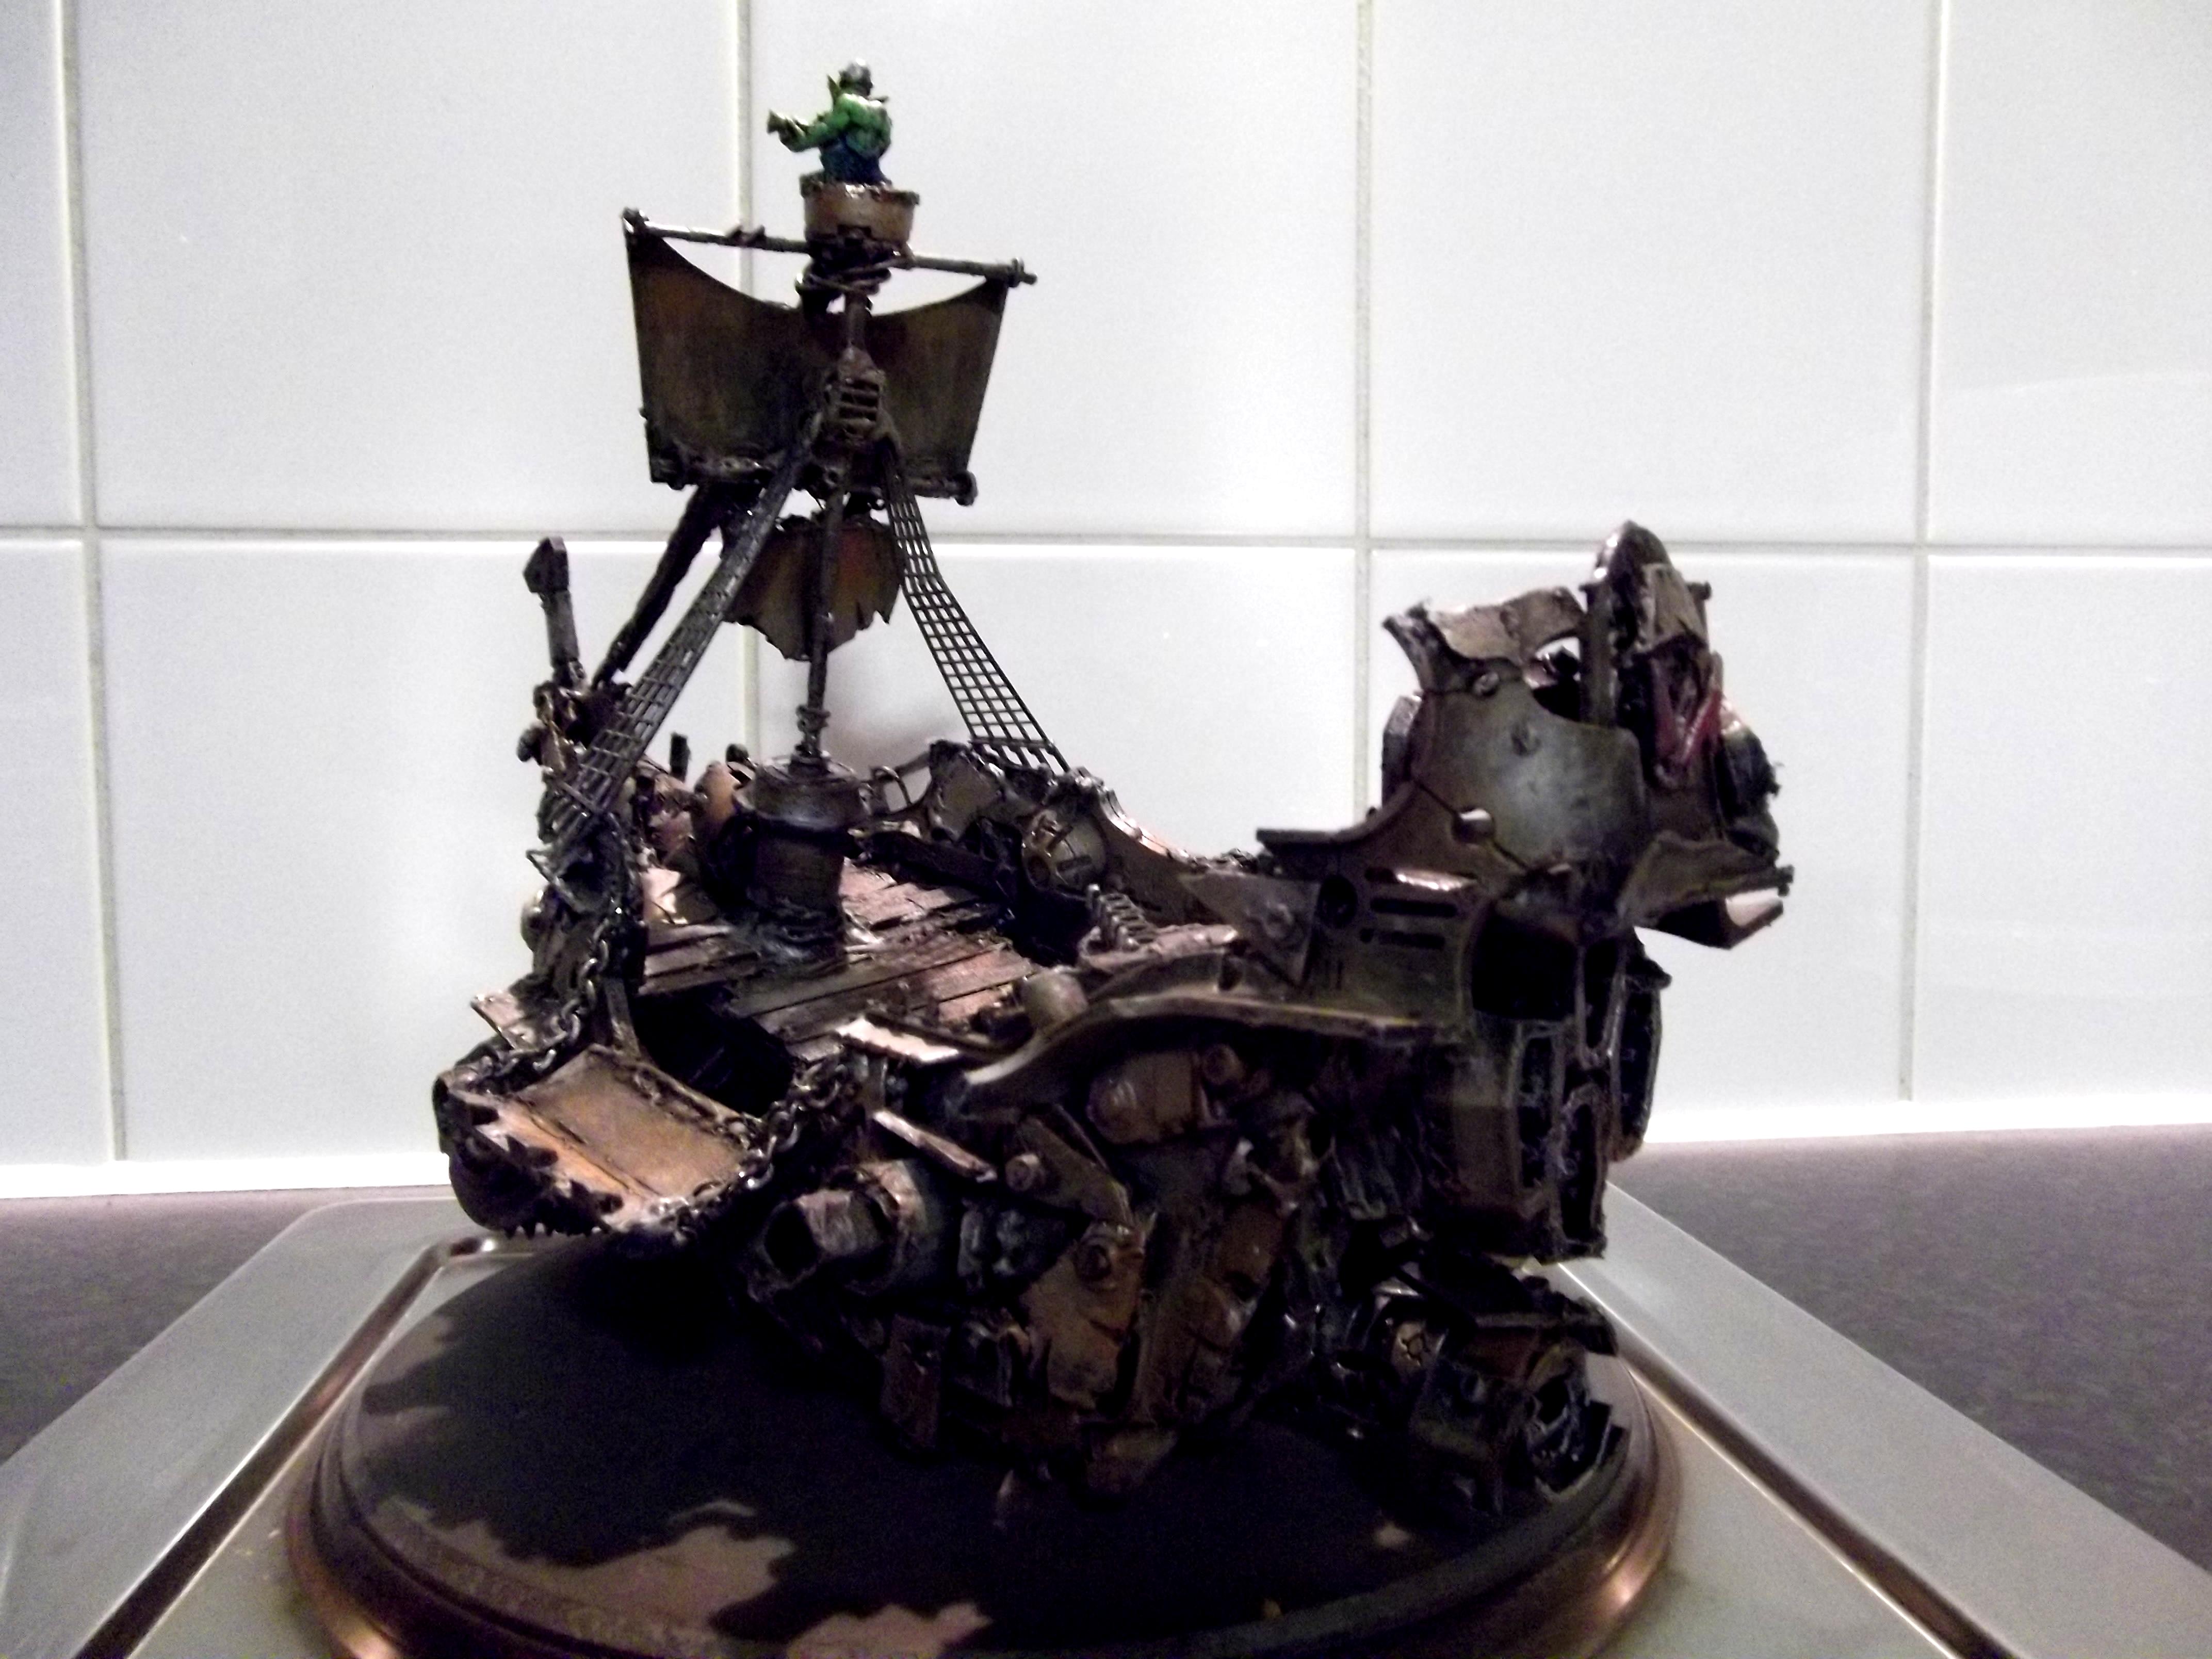 Battlewagon, Conversion, Freebooter, Looted, Necrons, Orks, Pirate, Scratch Build, Wagon, Warhammer 40,000